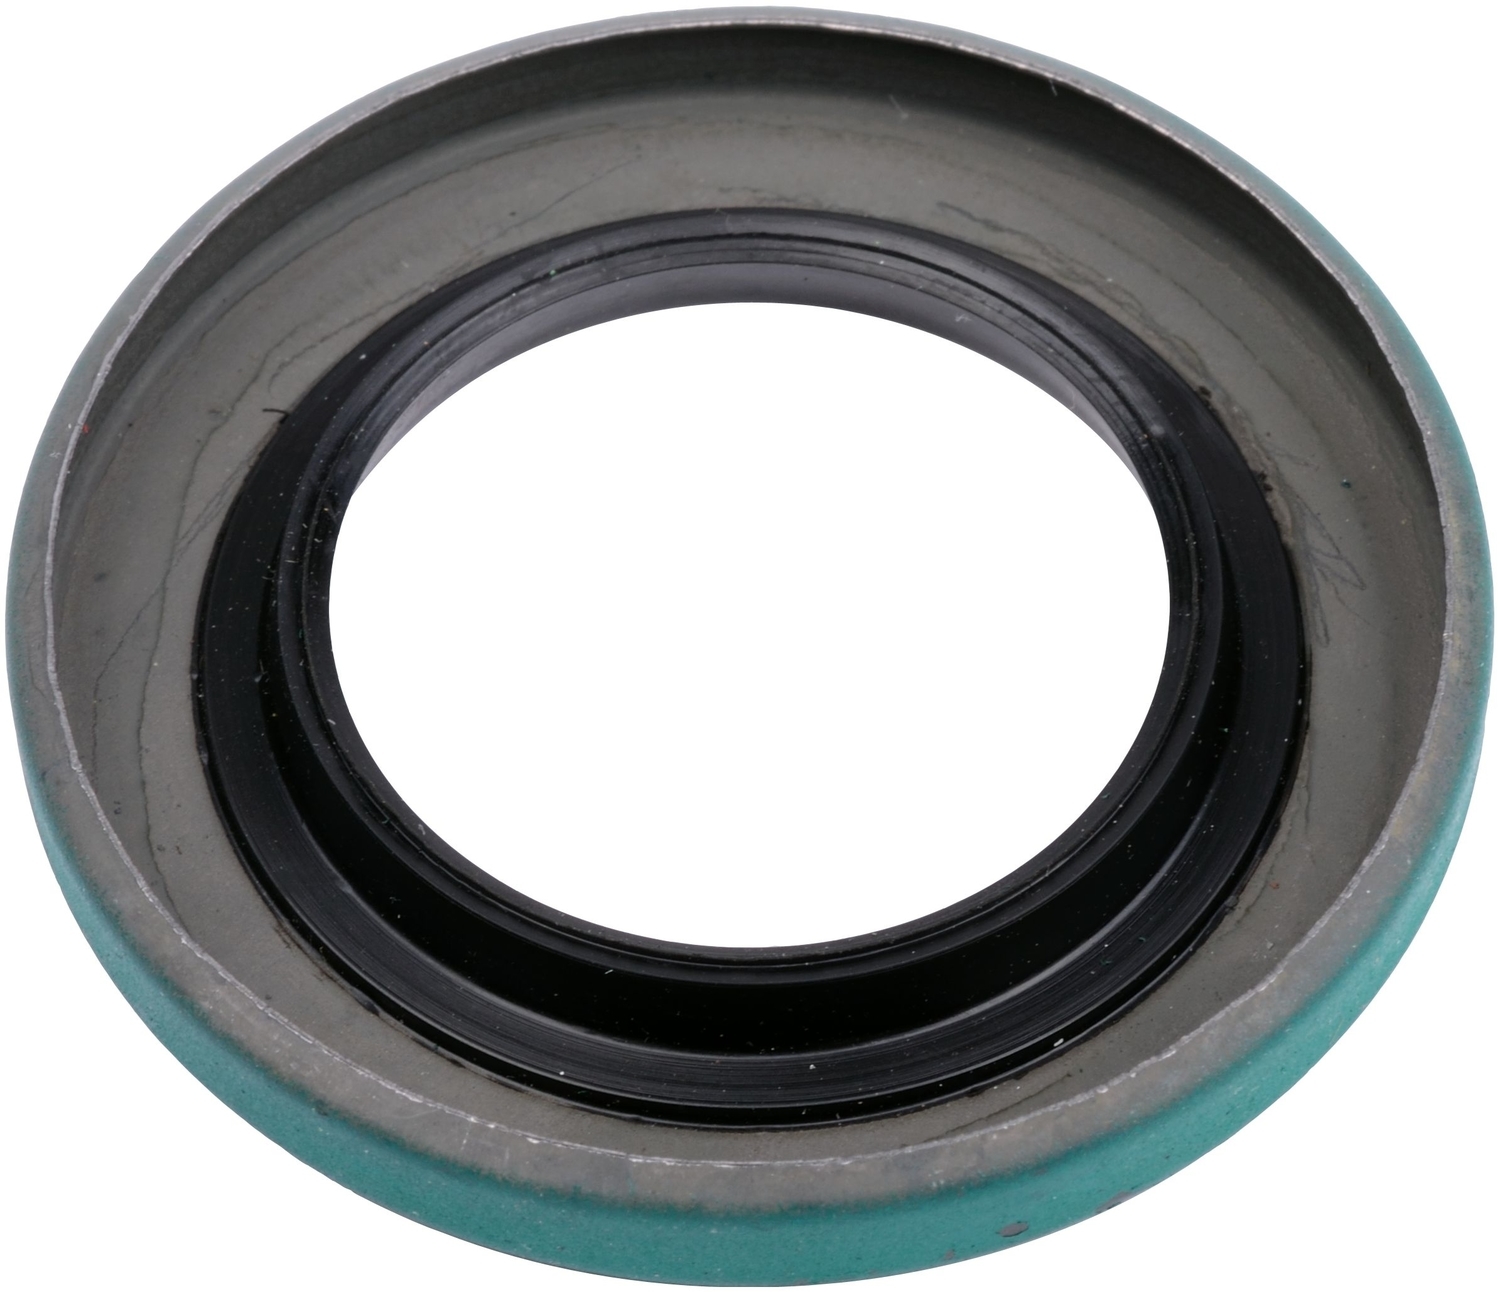 SKF (CHICAGO RAWHIDE) - Manual Trans Extension Housing Seal - SKF 6400